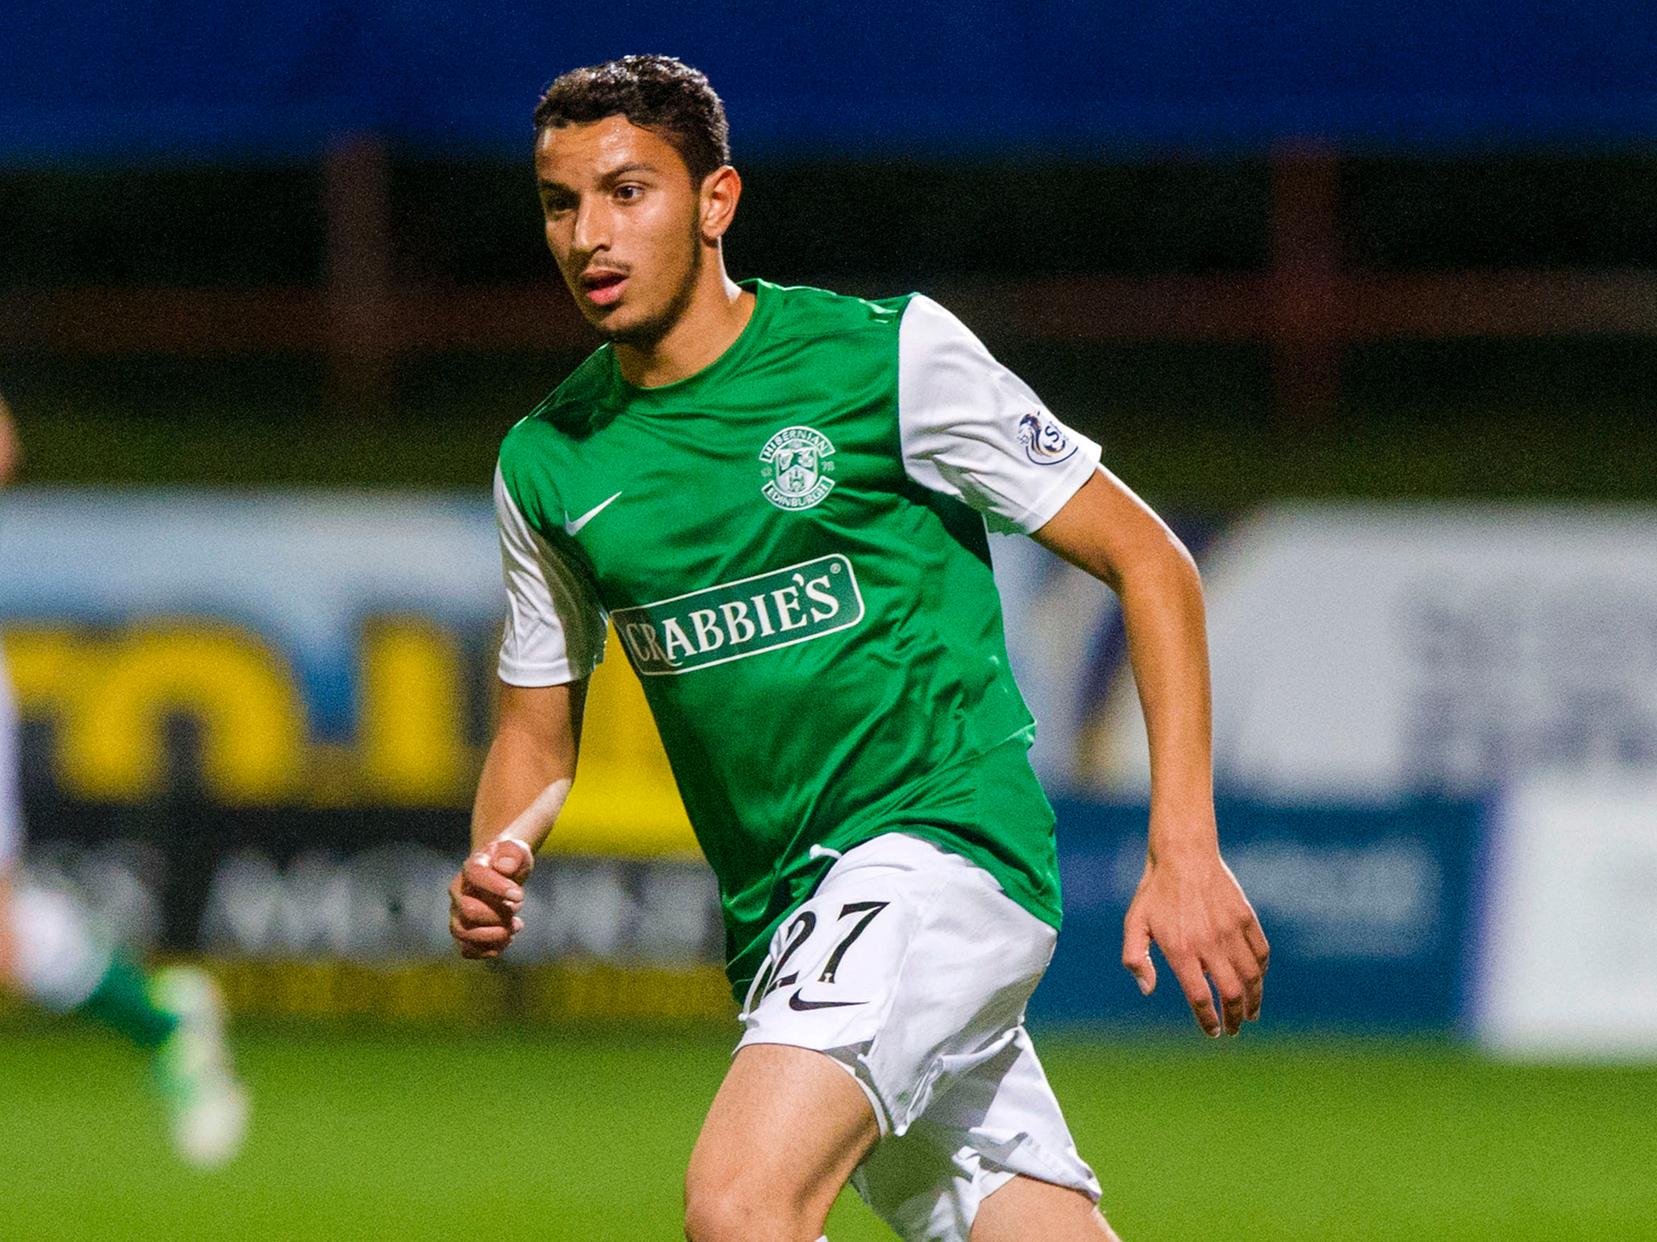 Filling out the Scott Allan role in this team is the French-Moroccan loanee from the unfortunate 2013/15 season. After impressing with French side Rens he ended up at Azerbaijani champions Qarabag.